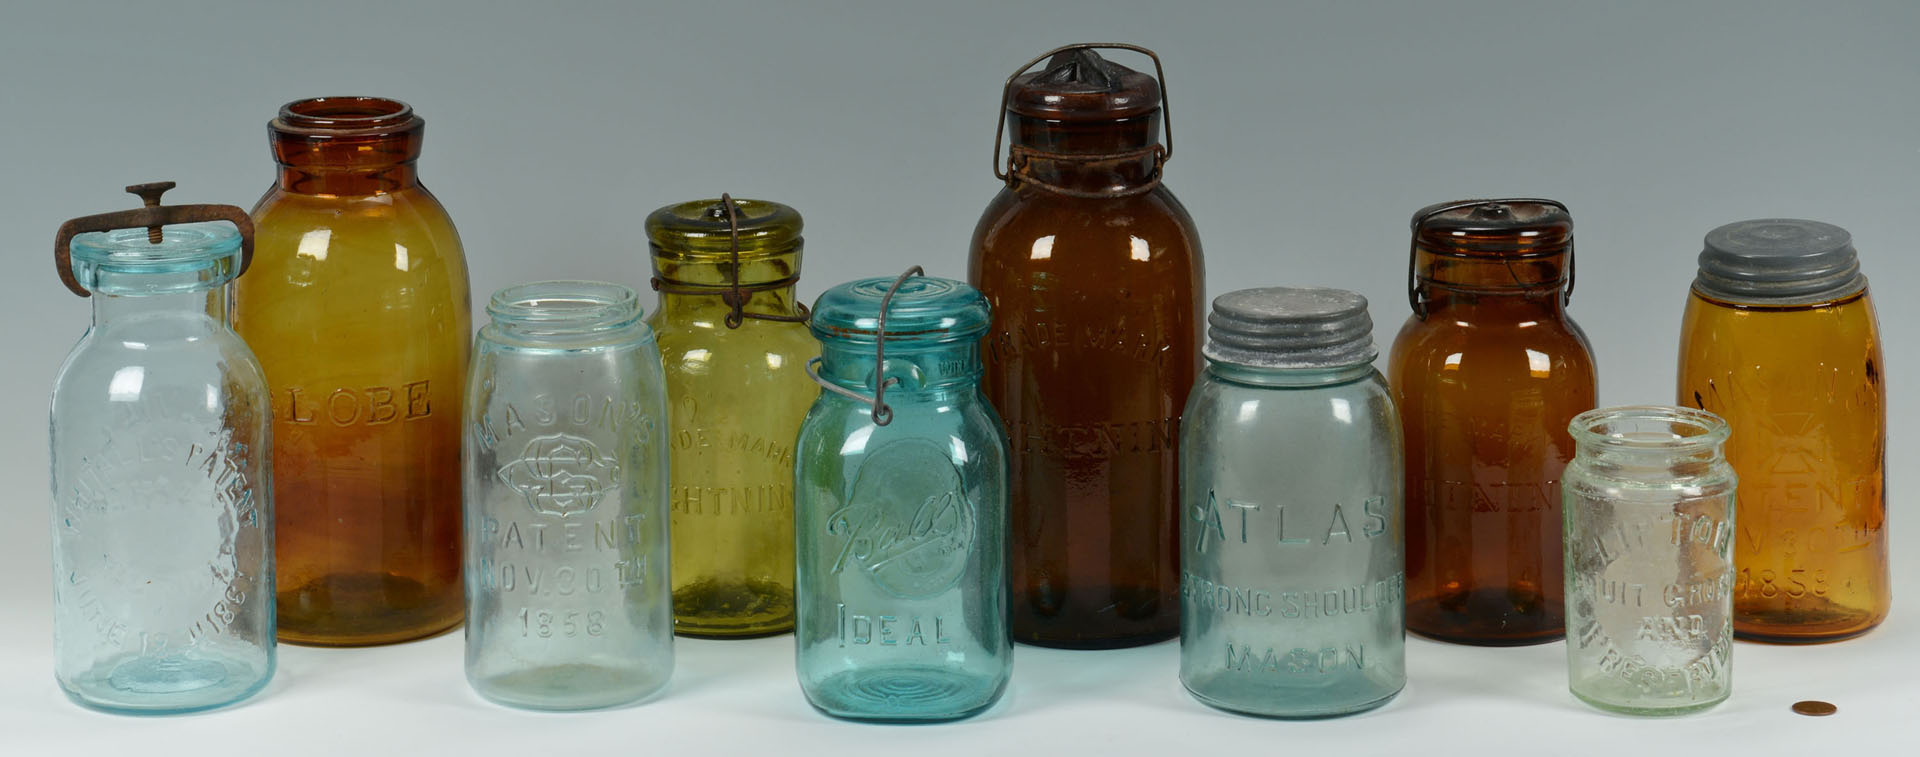 Lot 757: Grouping of 10 Early Canning Jars & water bottle